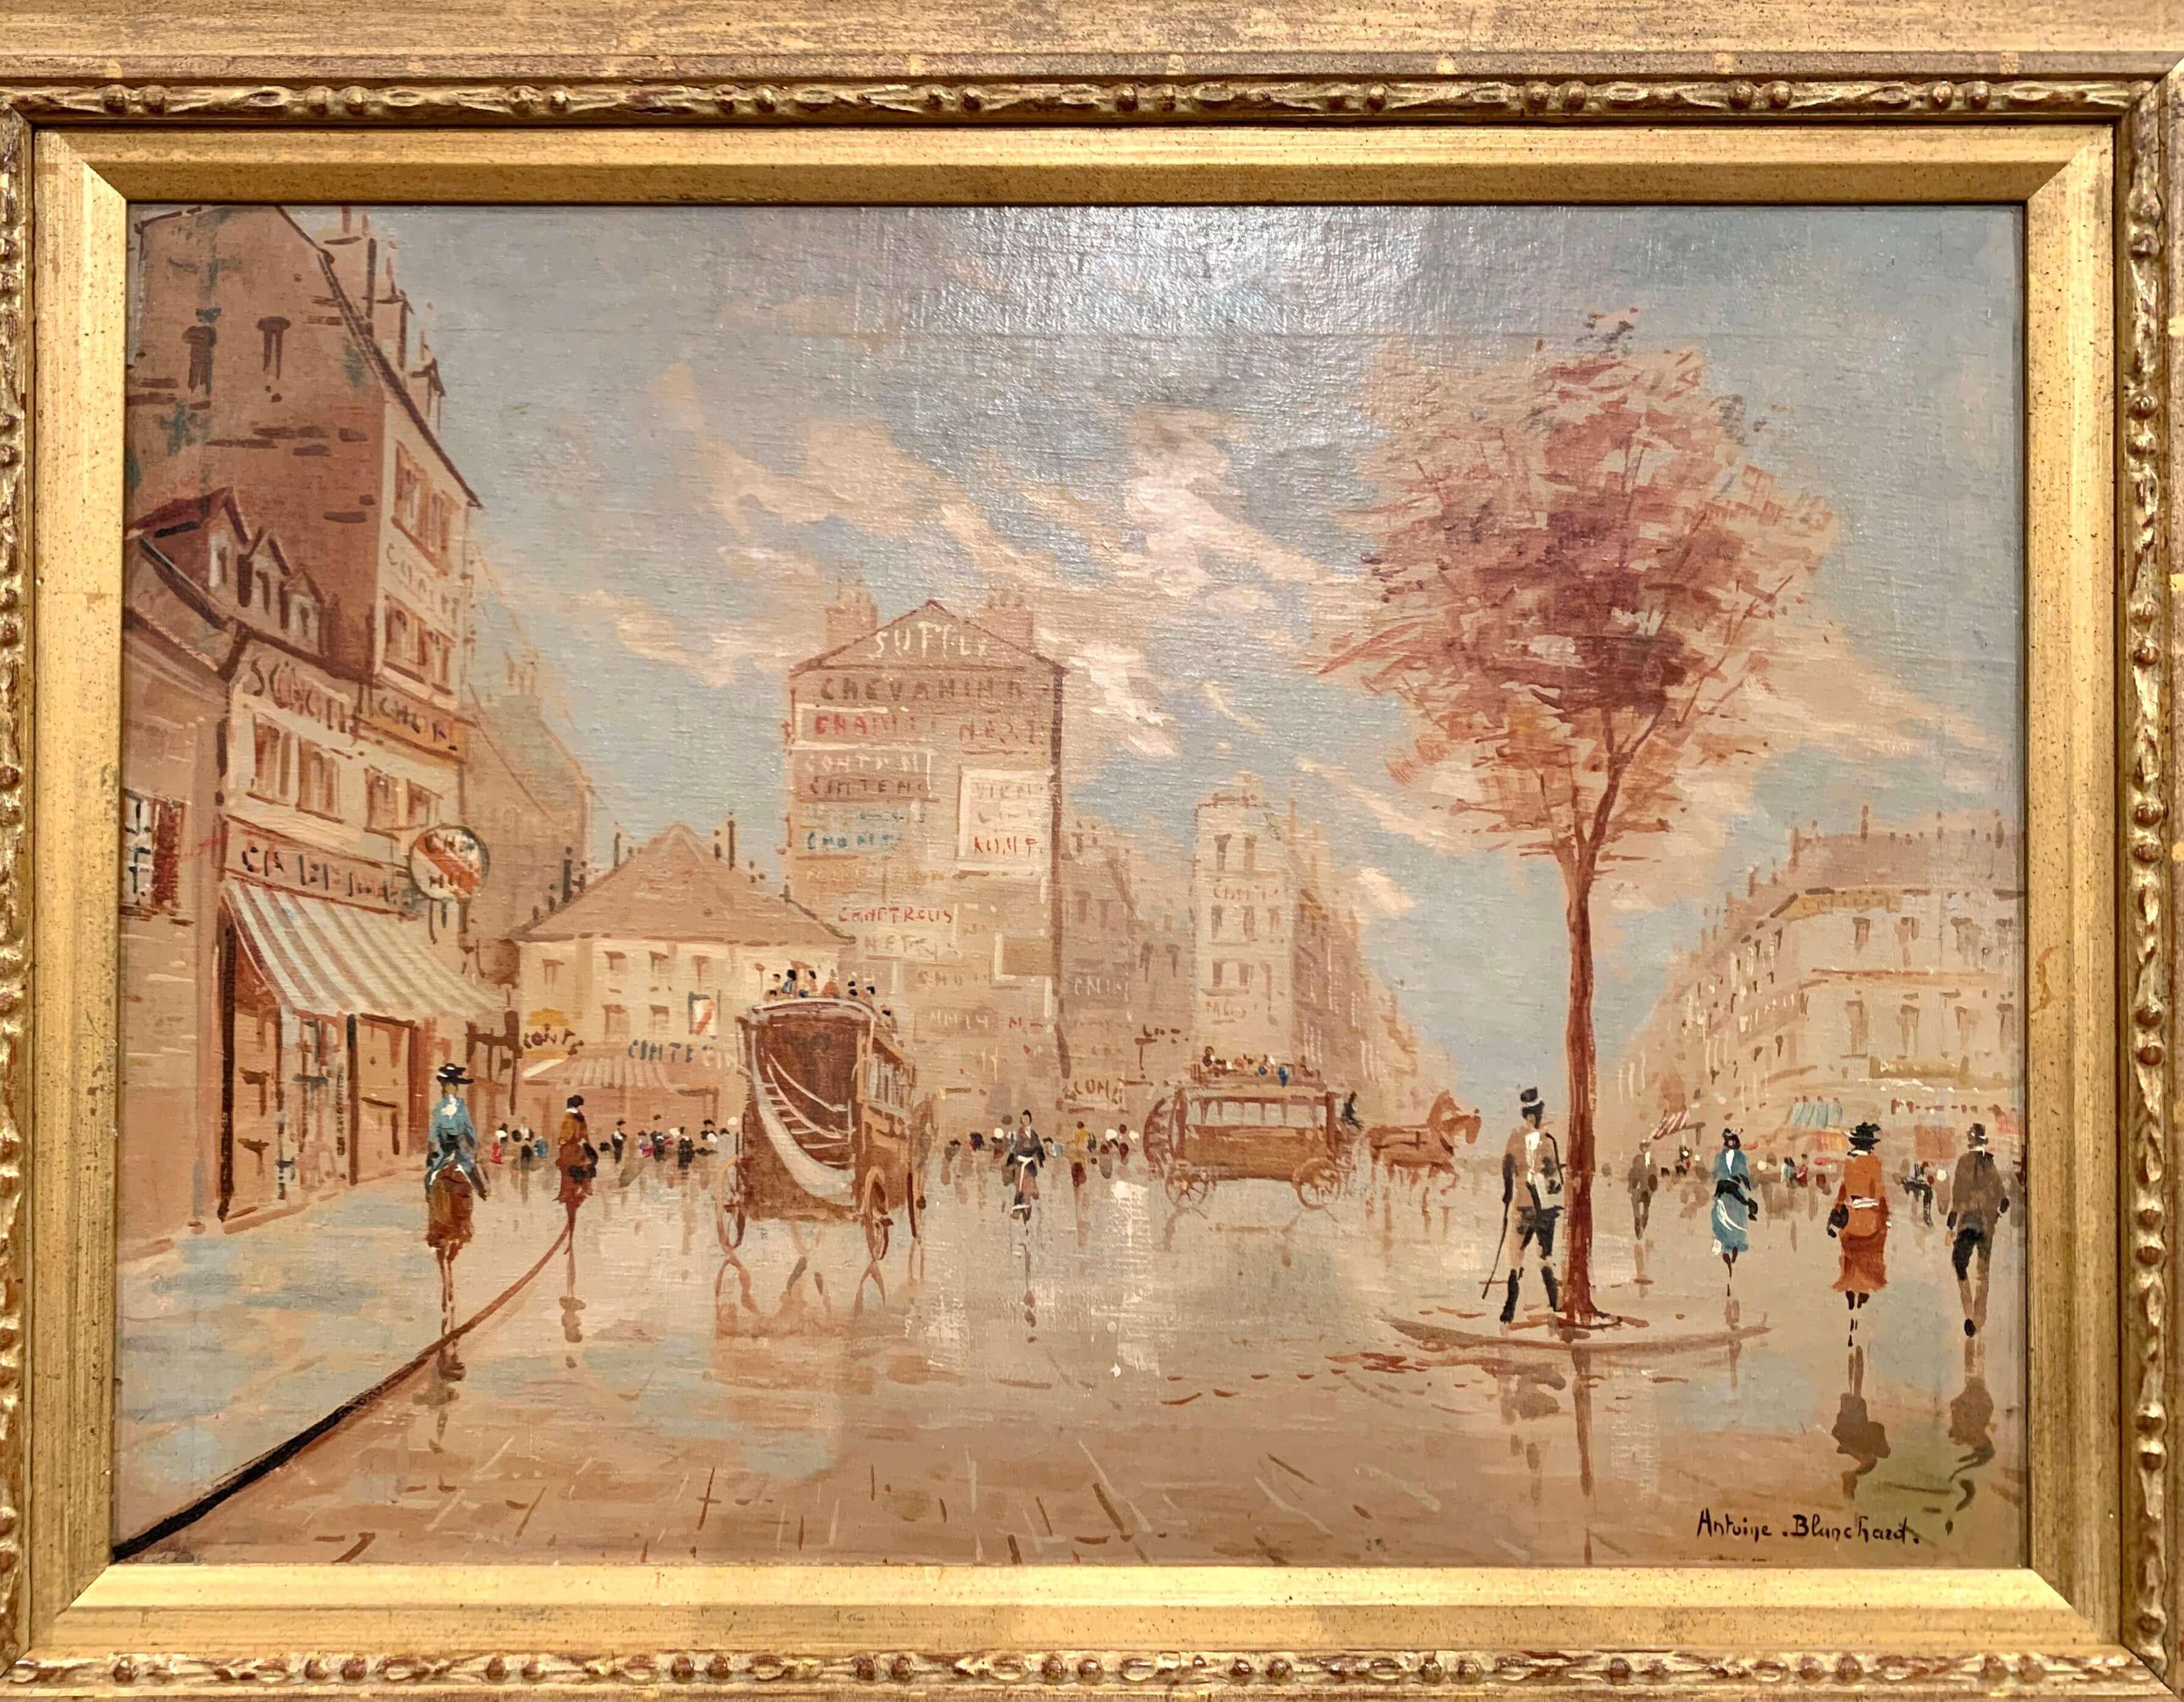 Set in a carved gilt frame, this exquisite oil on canvas painting depicts a typical Parisian scene, the artwork shows a realistic rendering of space with an impressionistic style. The result is one that shows the hand of the artist, and expresses an